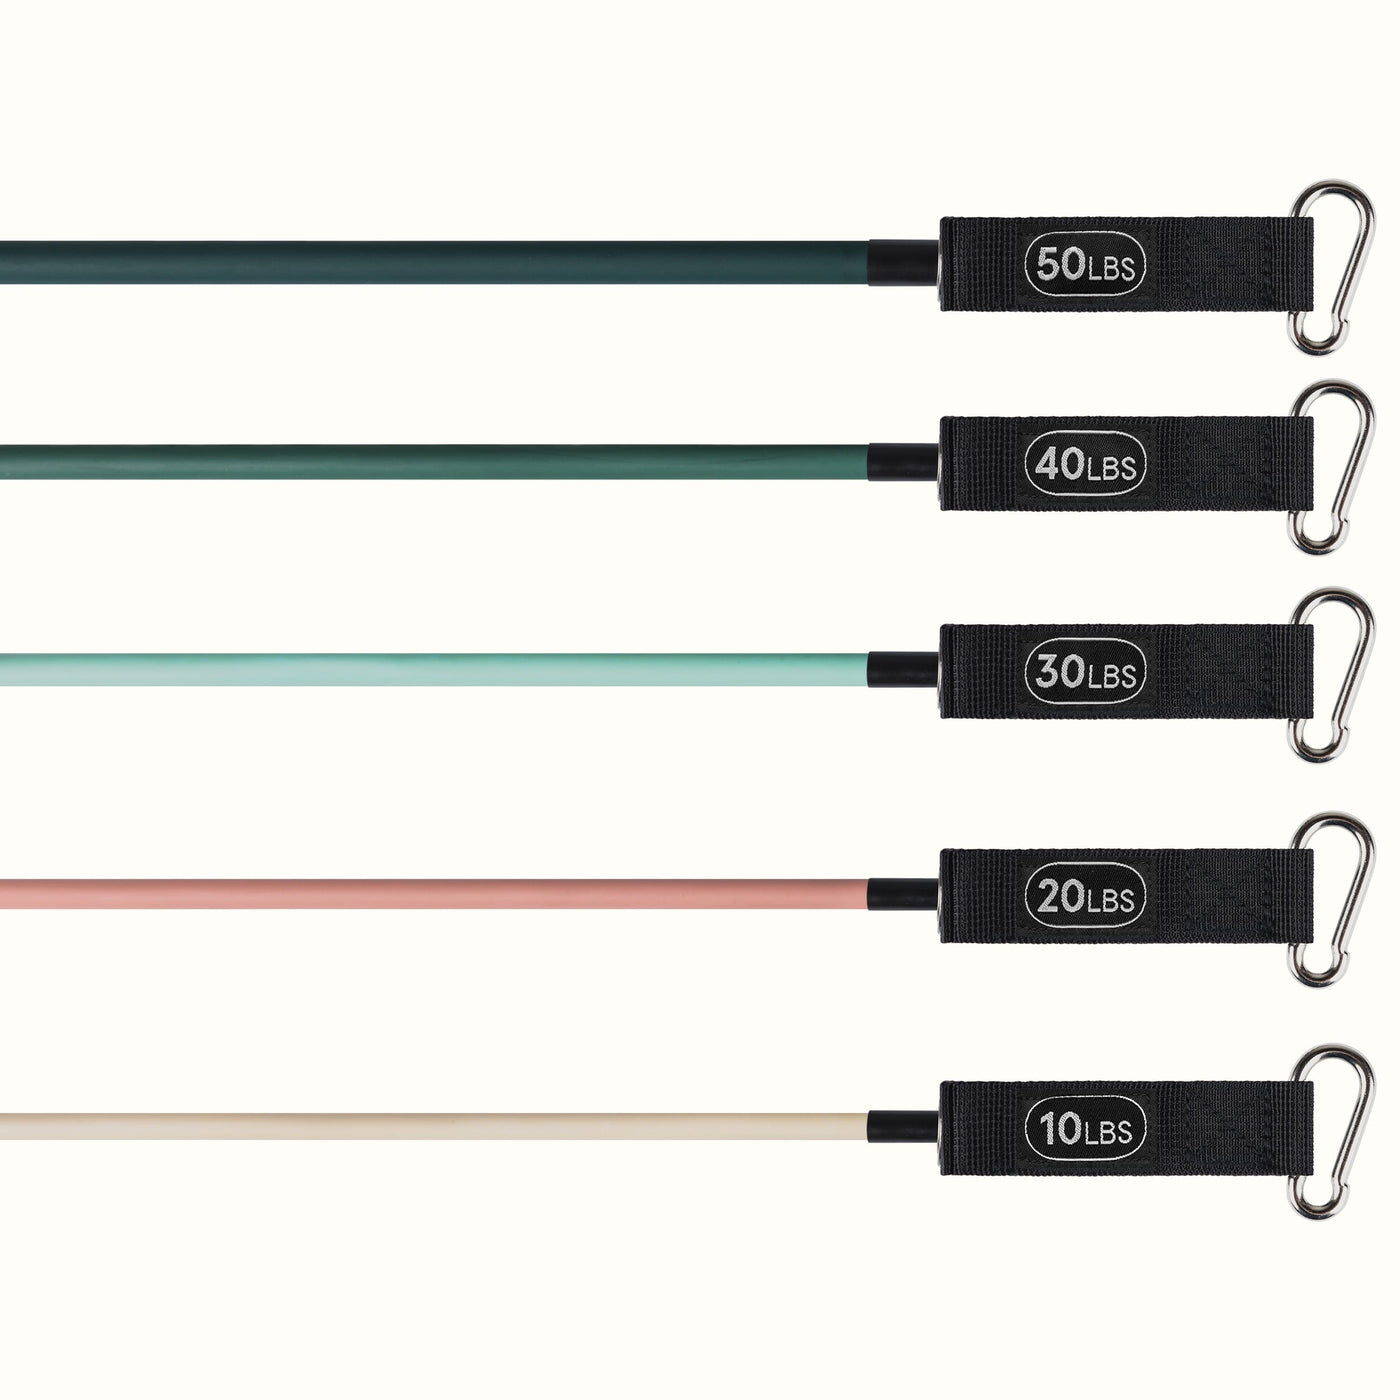 Train Resistance Bands - Set of 5 | Smoothie